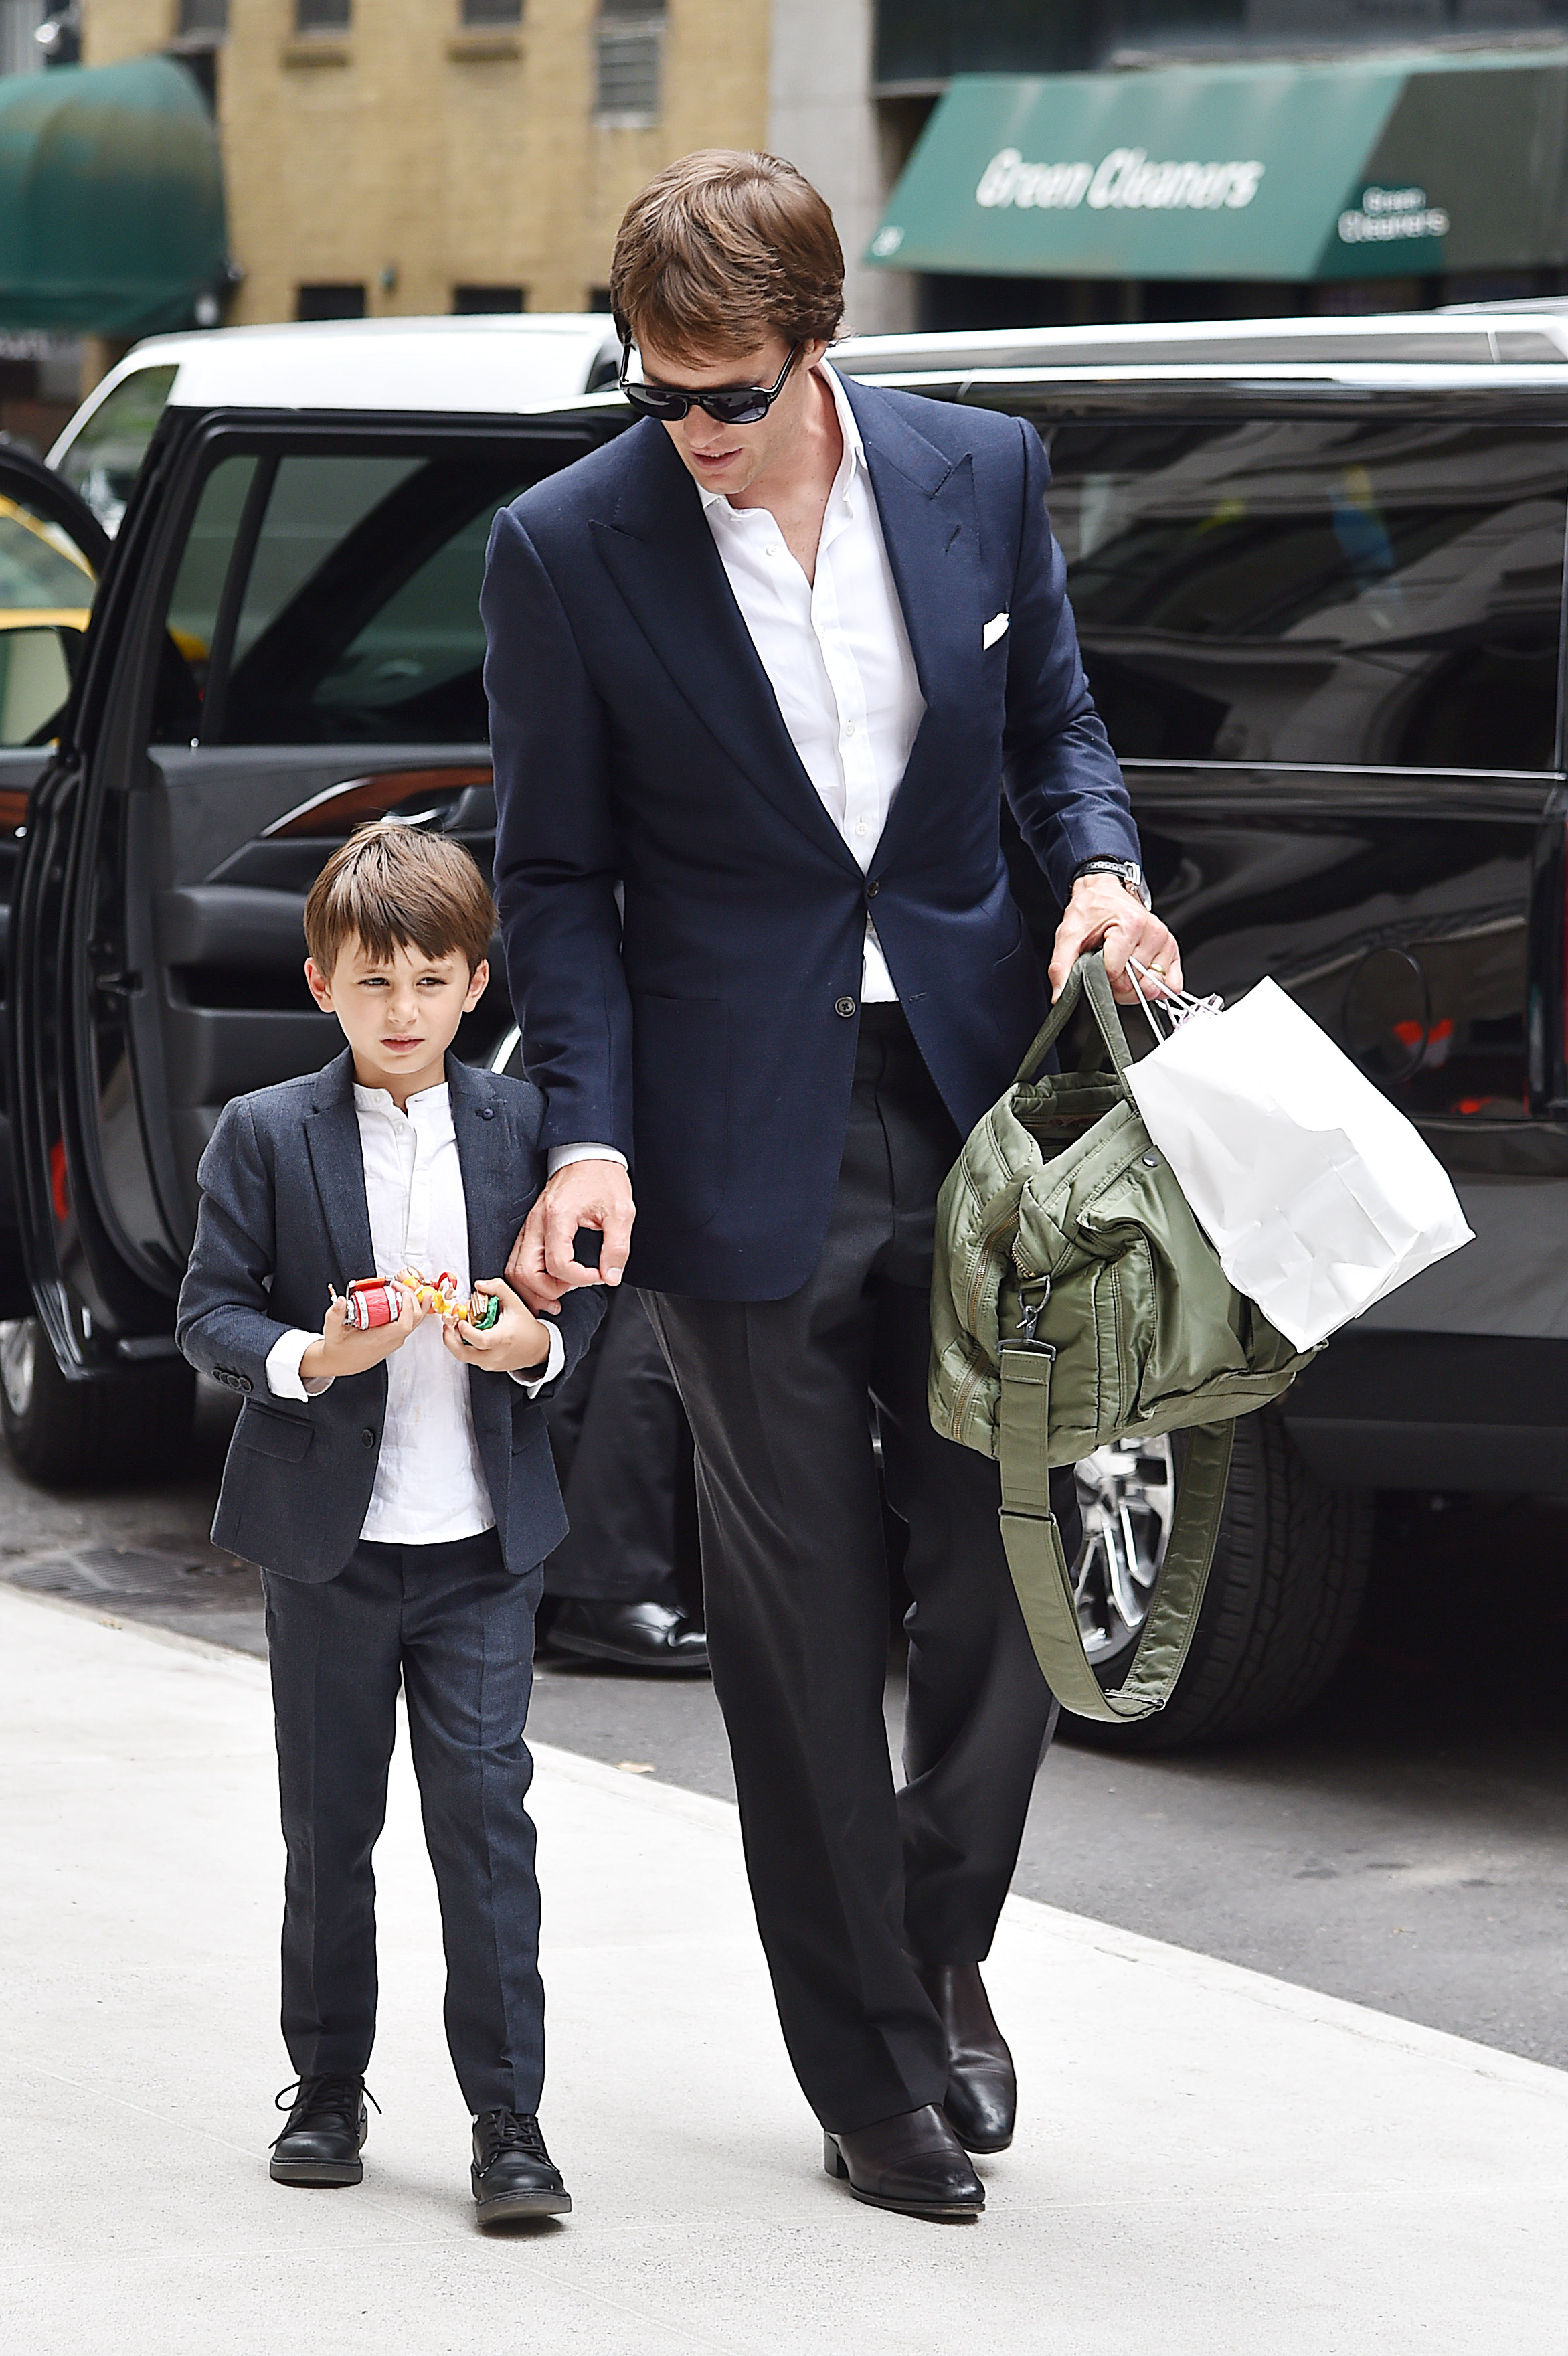 Tom with one of his two sons (Photo credit: Splash News)